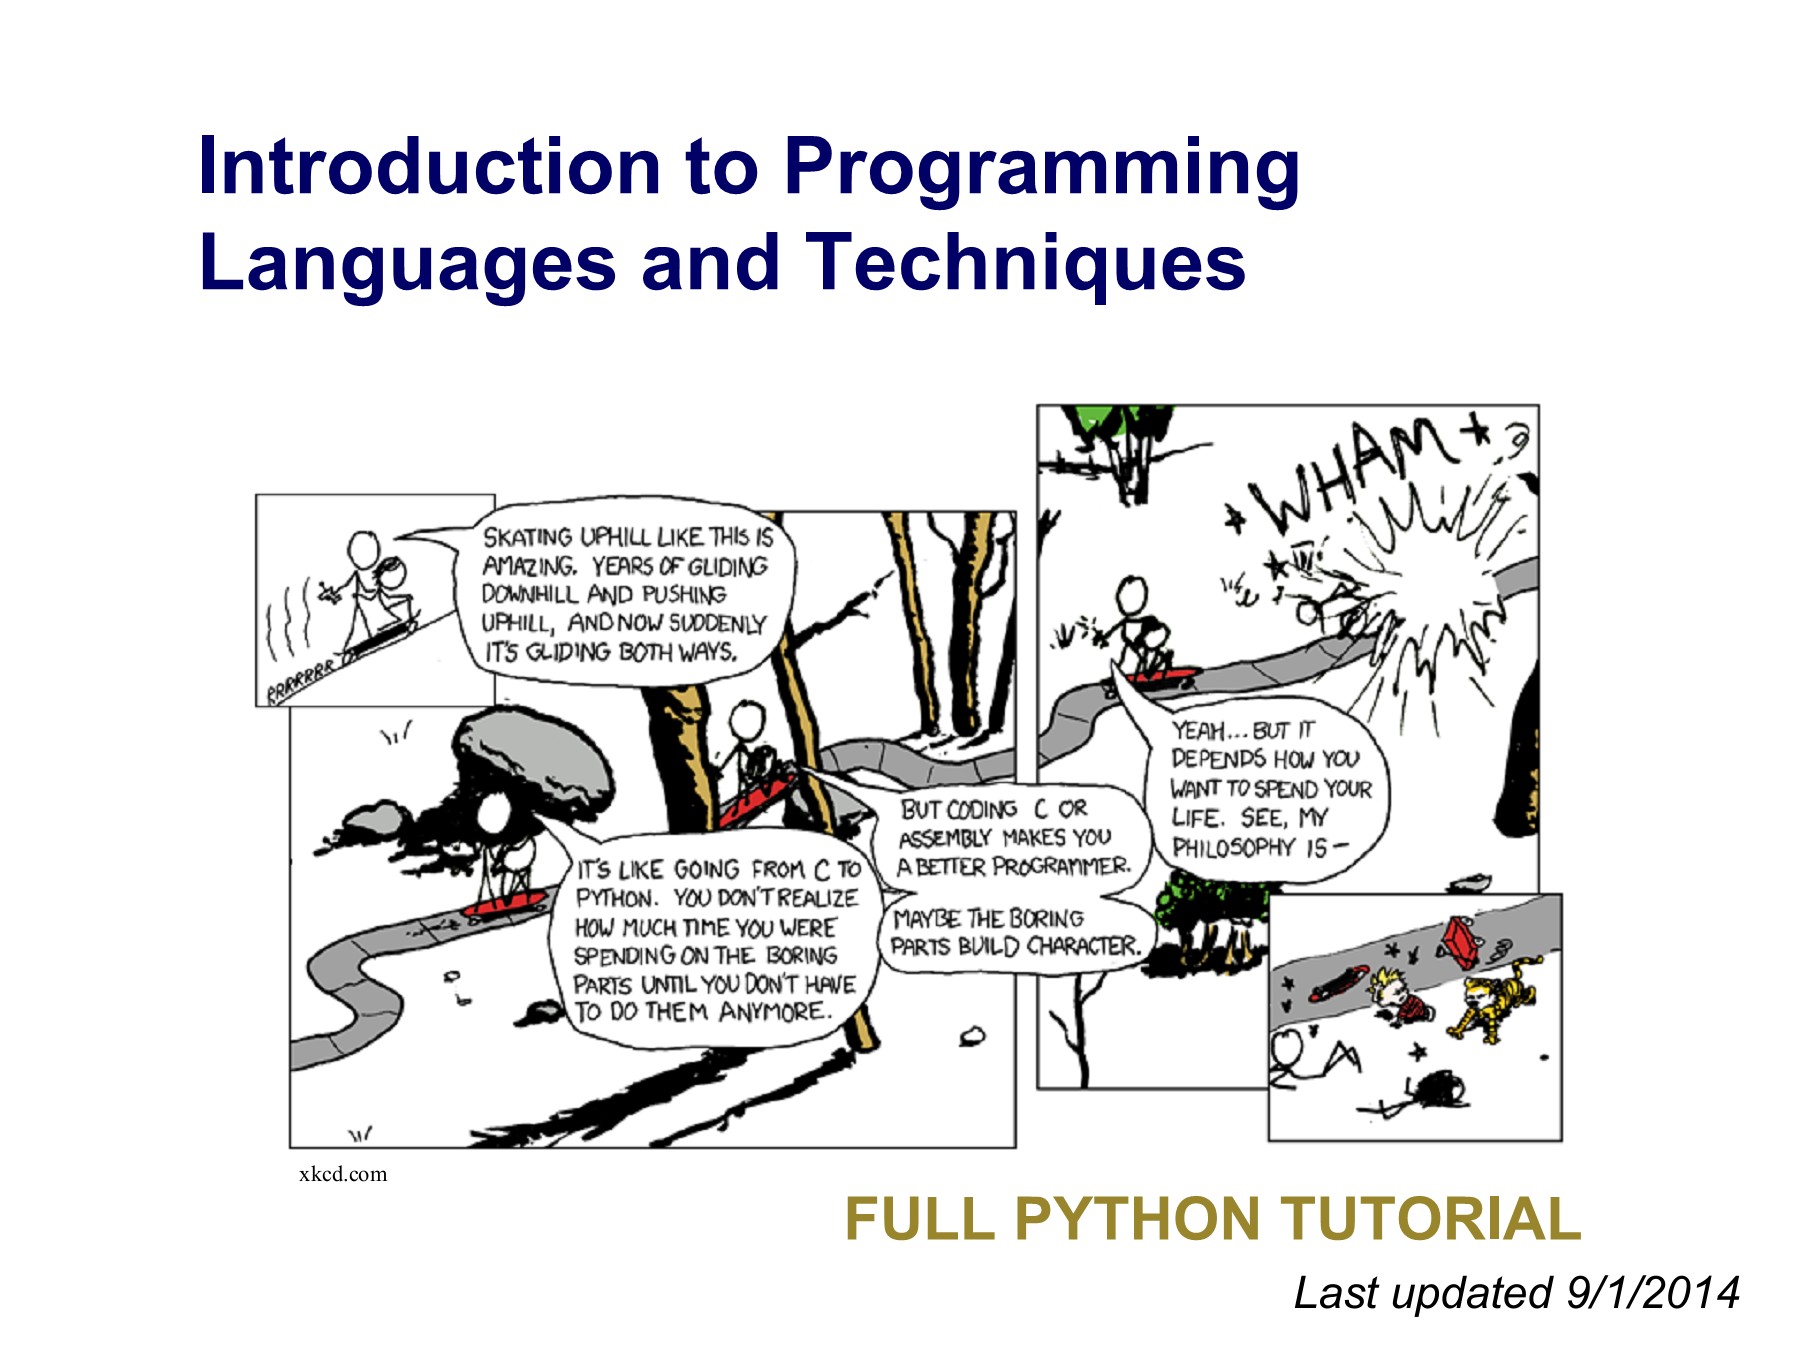 Introduction to Programming Languages and Techniques. Full Python Tutoria